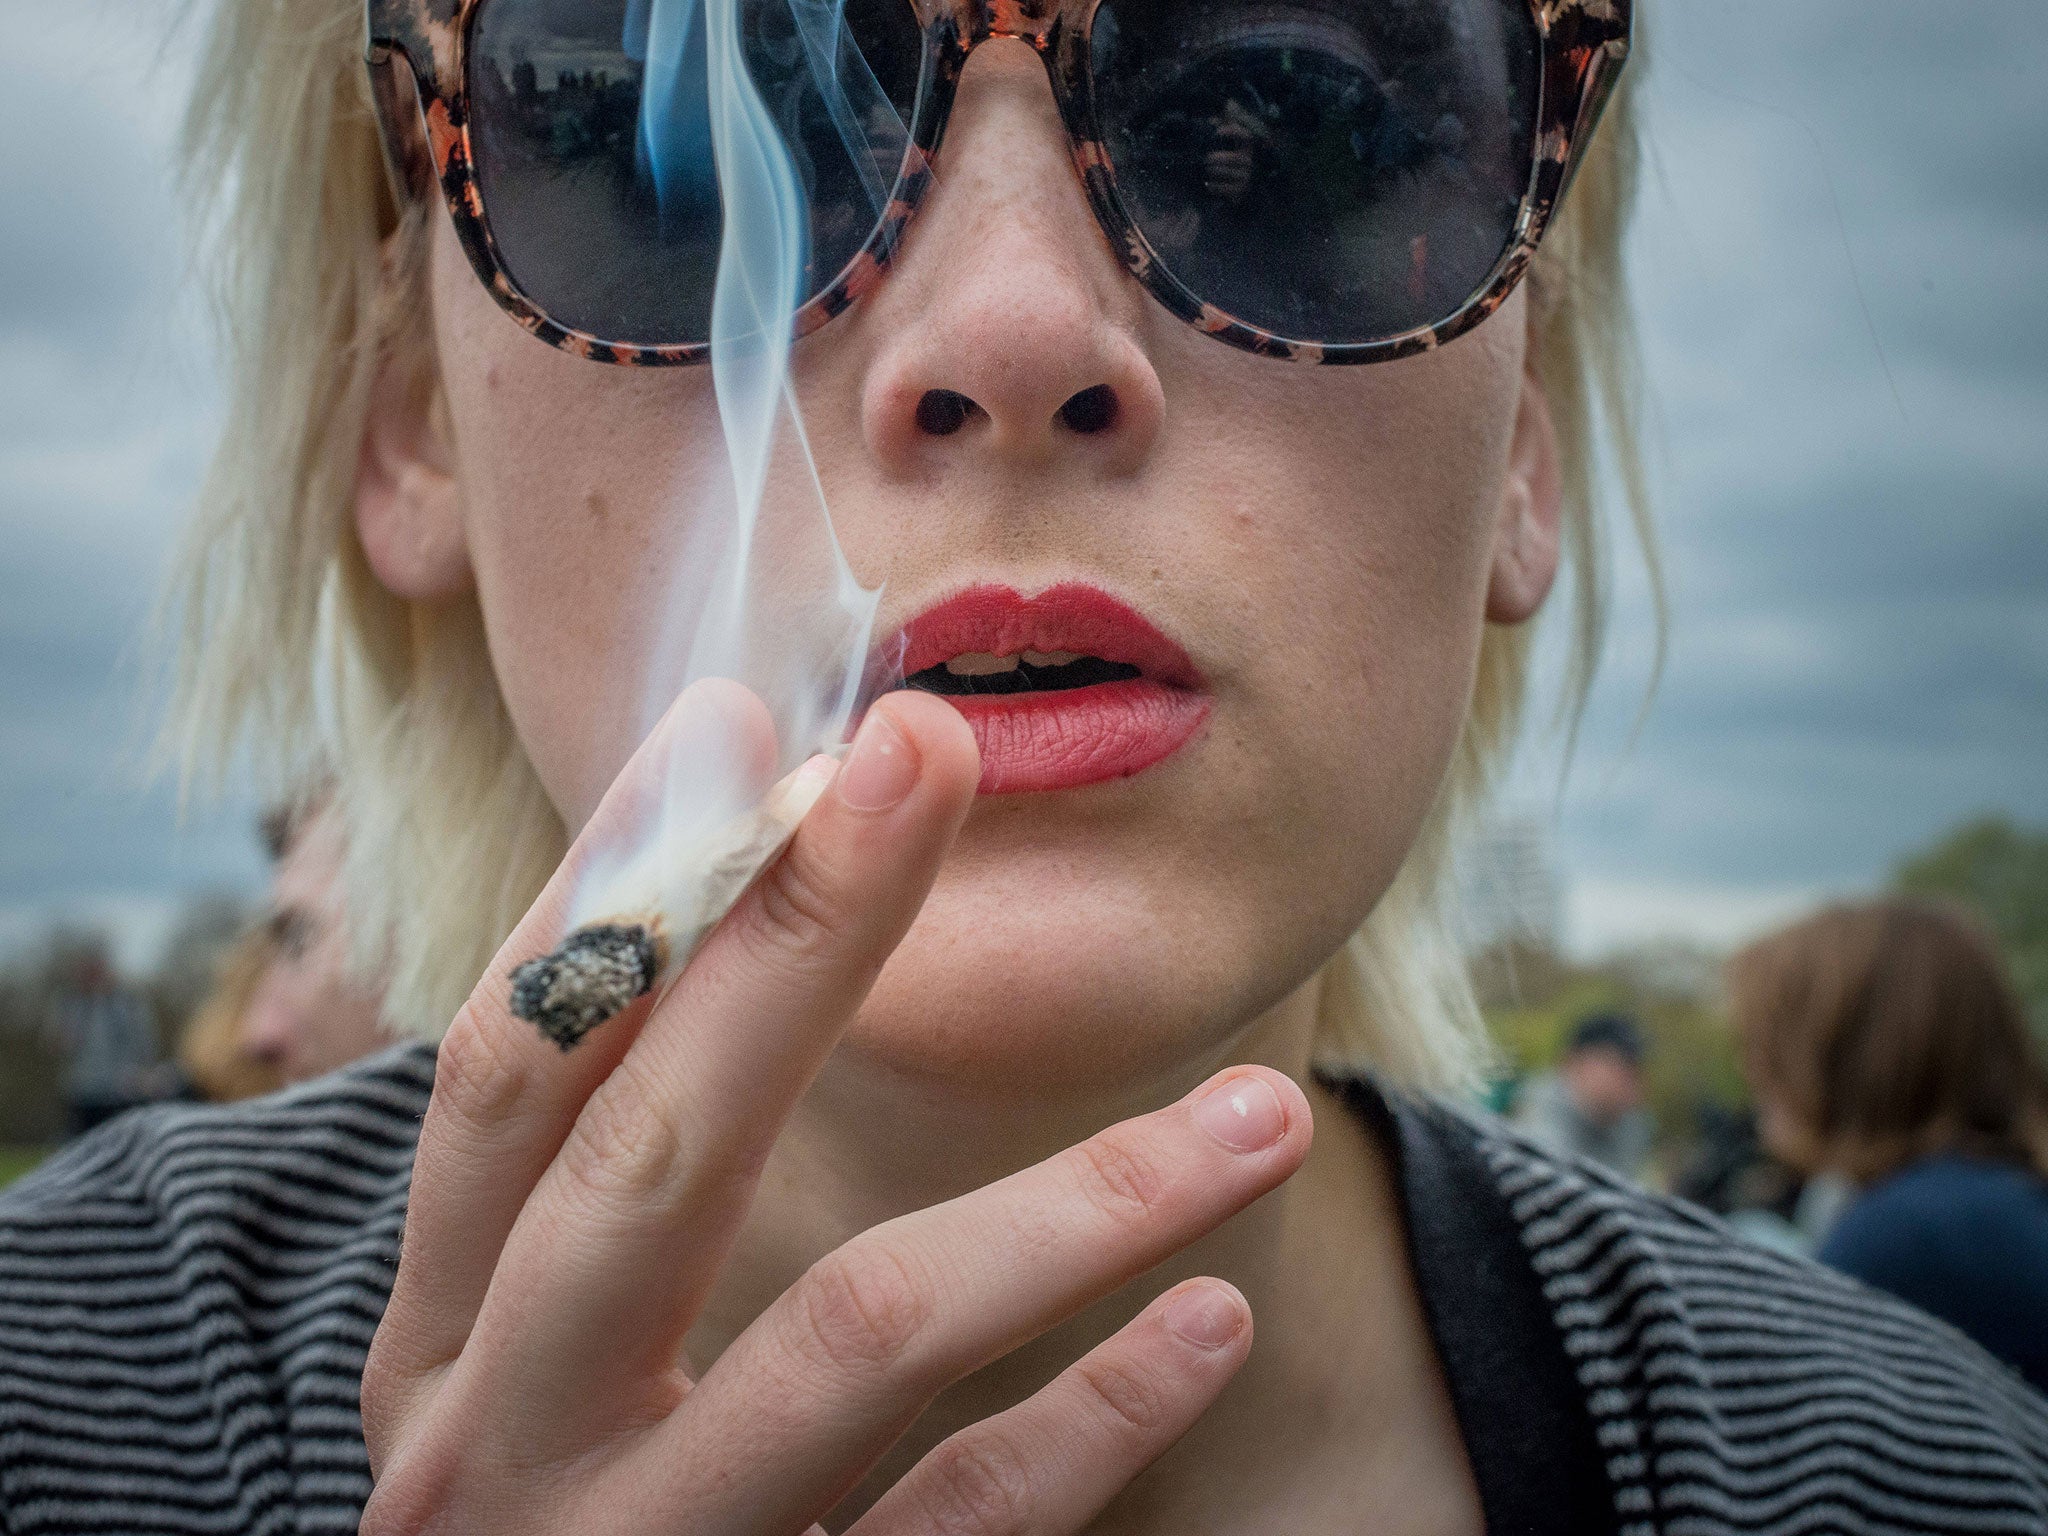 '420 Day' pro-cannabis rally at Hyde Park, London